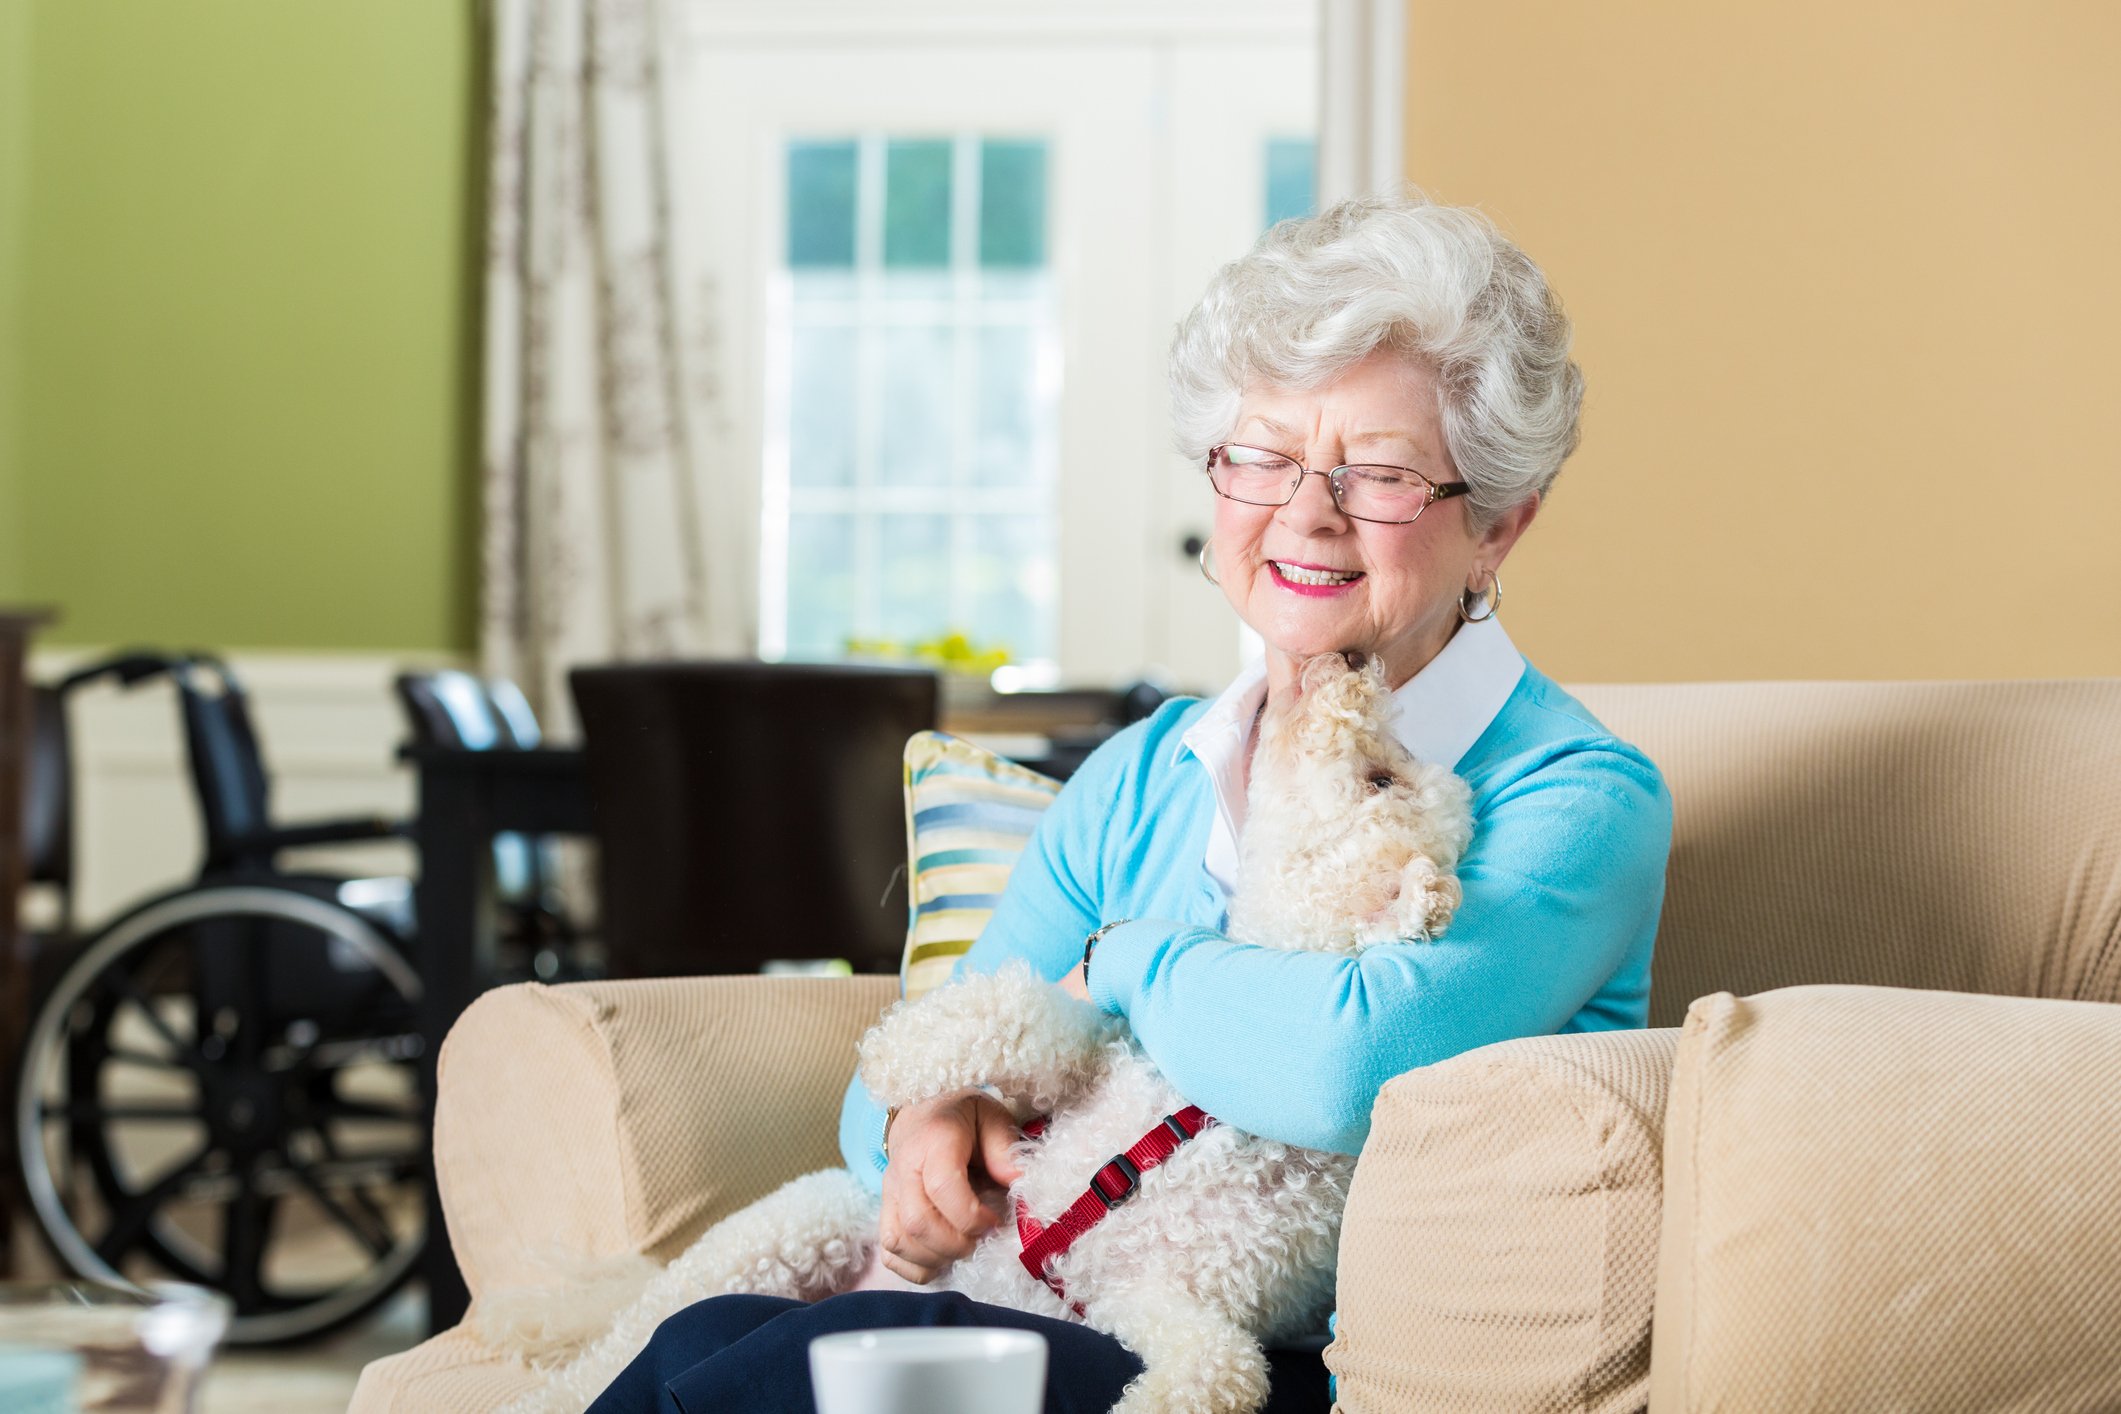 Slideshow: 10 Innovative Memory Care Activities That Engage Residents